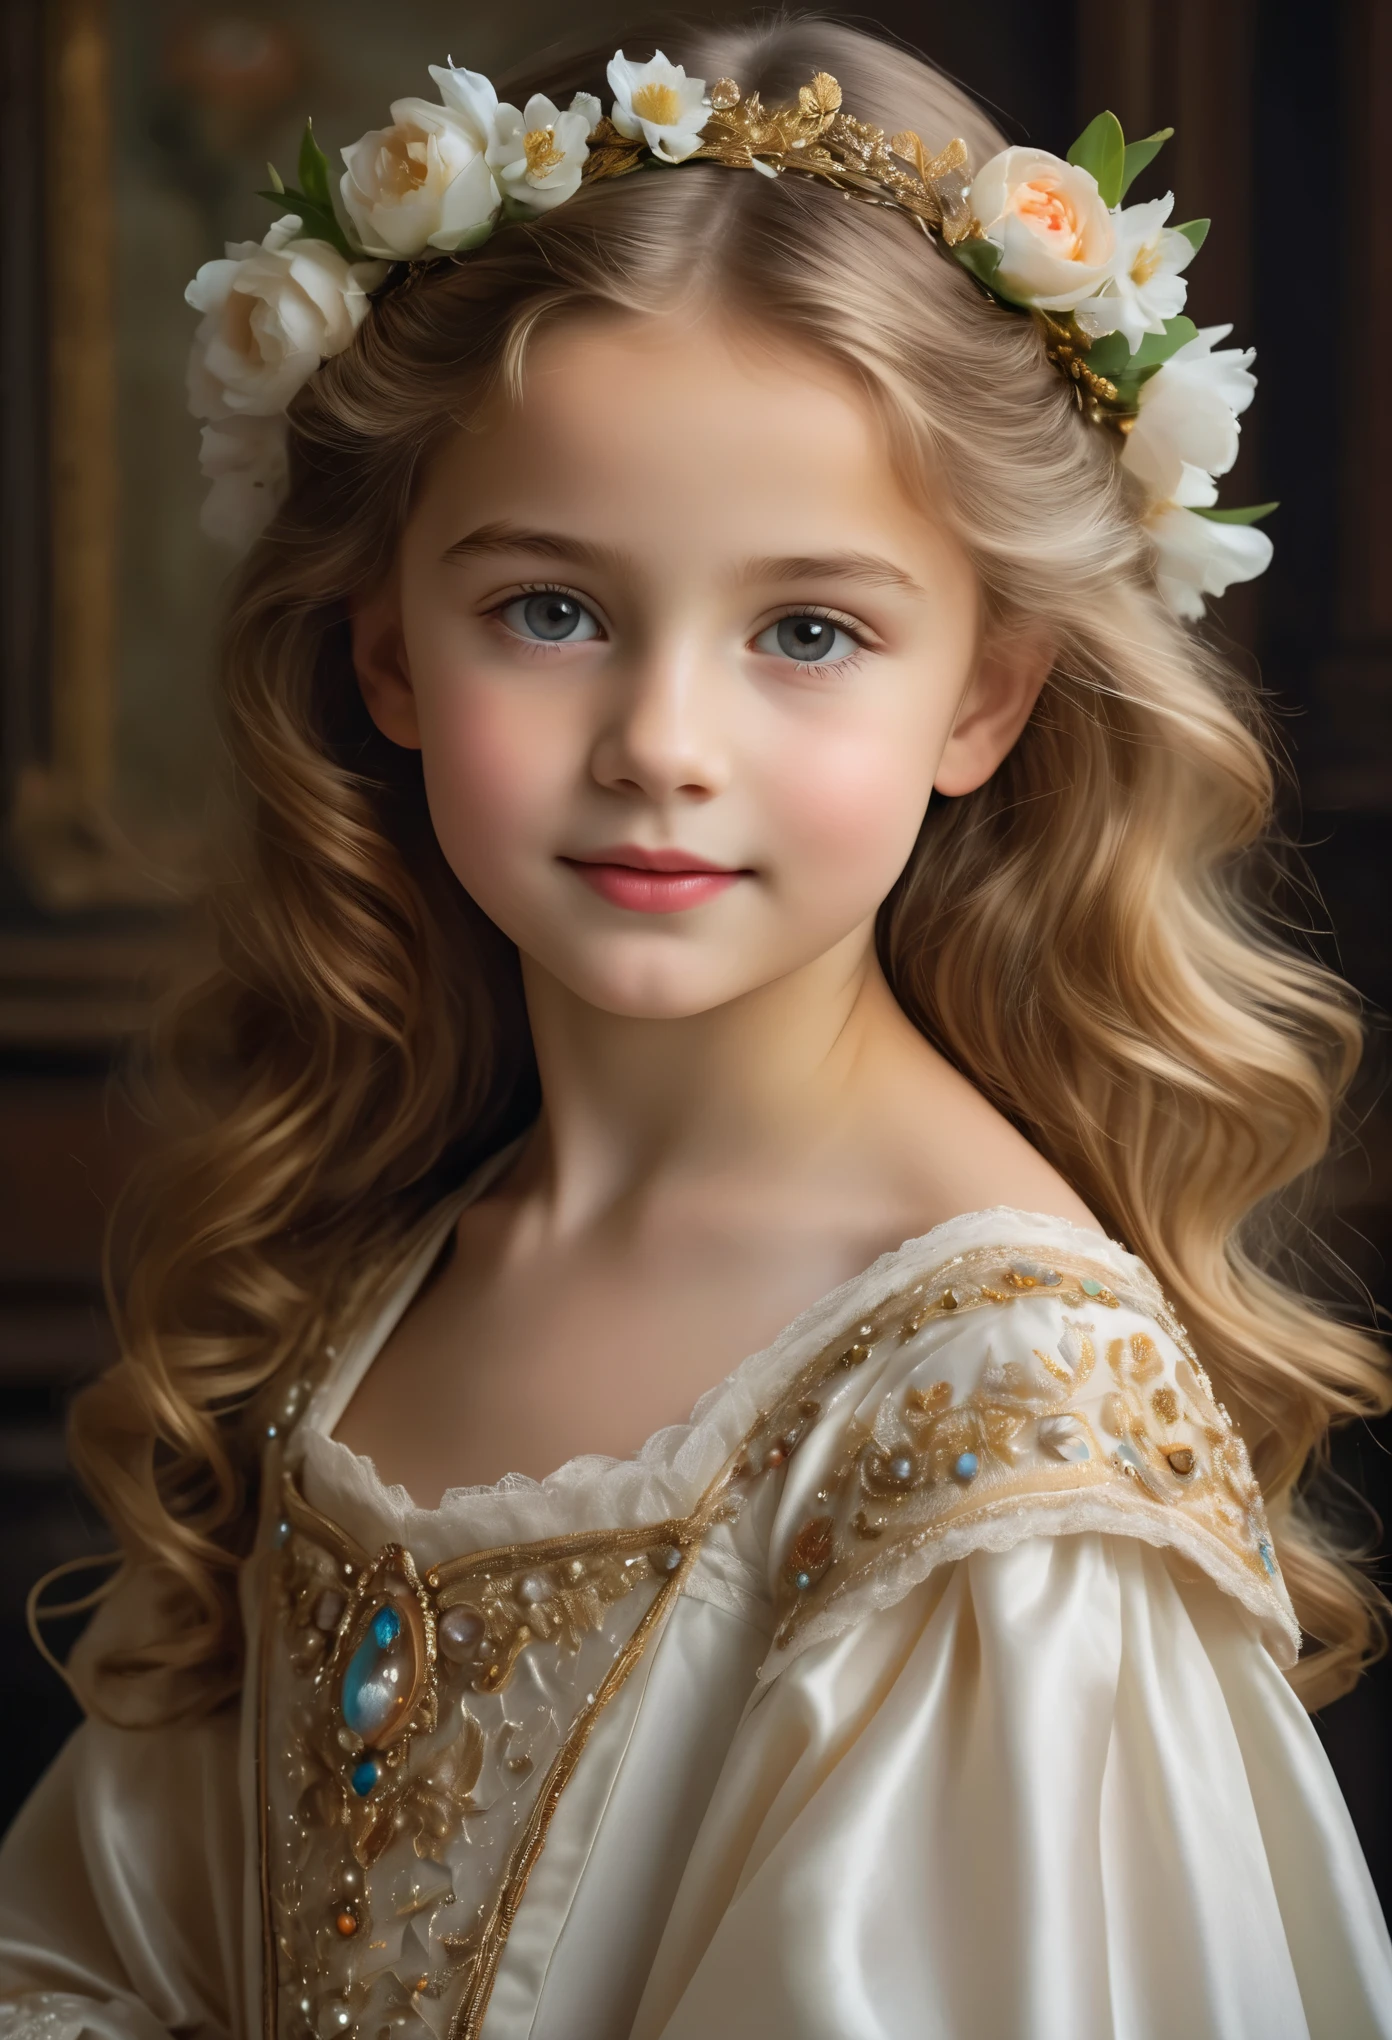 (best quality,4k,8k,highres,masterpiece:1.2), ultra-detailed, (realistic,photorealistic,photo-realistic:1.37),In the portrait of this enchanting 13-year-old girl, the daughter of a prosperous merchant during the flourishing 17th century in the Netherlands, every brushstroke captures the essence of her youth and innocence.

Her golden locks cascade in gentle waves, adorned with ribbons and pearls that speak of her family's affluence. Each curl seems to dance in the light, framing her cherubic face with an air of purity and grace. Her eyes, wide and bright, reflect the curiosity and wonder of childhood, as if every glance is filled with endless possibilities.

Her rosy cheeks flush with vitality, a testament to her health and happiness in the embrace of her privileged upbringing. A delicate dimple graces her smile, adding a touch of sweetness to her countenance that is as charming as it is captivating.

Dressed in the finest silks and lace, her gown whispers softly with every movement, a symphony of luxury and refinement. Embroidered motifs and intricate details adorn her attire, showcasing the exquisite craftsmanship of the era and her family's esteemed status in society.

In her hands, she holds a posy of fresh flowers, their vibrant colors mirroring the bloom of her youth. With each delicate petal, she seems to embody the essence of spring itself, a beacon of hope and renewal in a world filled with uncertainty.

This portrait of the 12-year-old daughter of a prosperous Dutch merchant is not just a representation of beauty; it's a window into a bygone era of elegance, privilege, and the timeless innocence of youth.